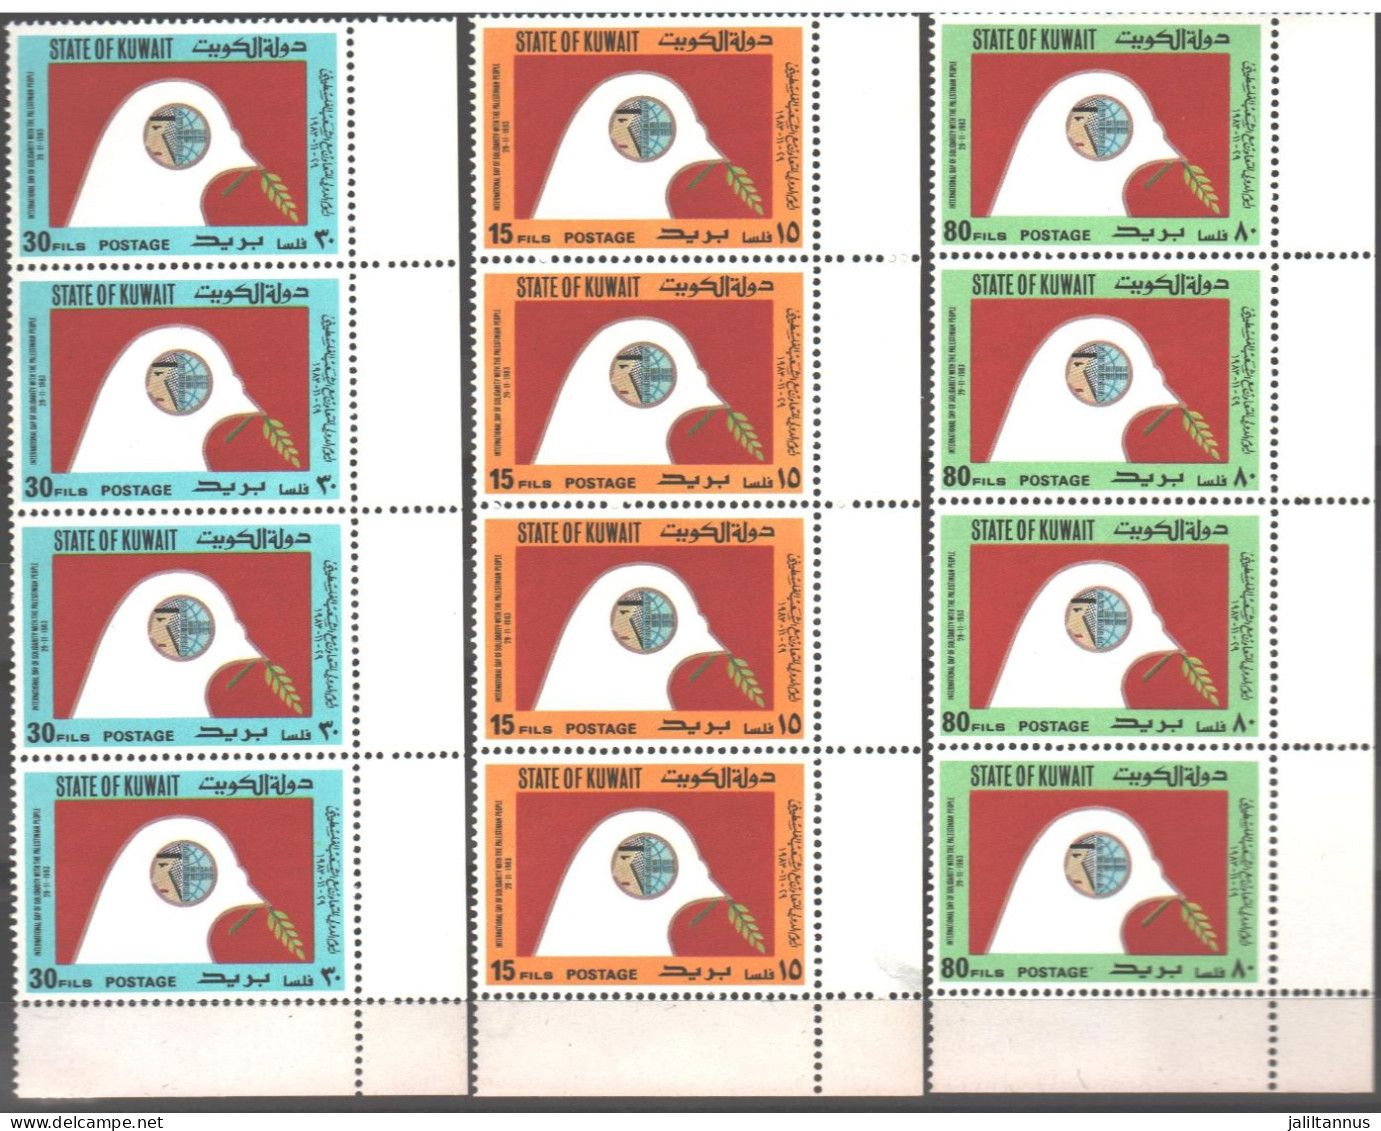 Kuwait (PALESTINE) THE INTERNATIONAL DAY OF SOLIDARITY WITH THE PALESTINIAN PEOPLE 1983 / 4 SETS - Koweït